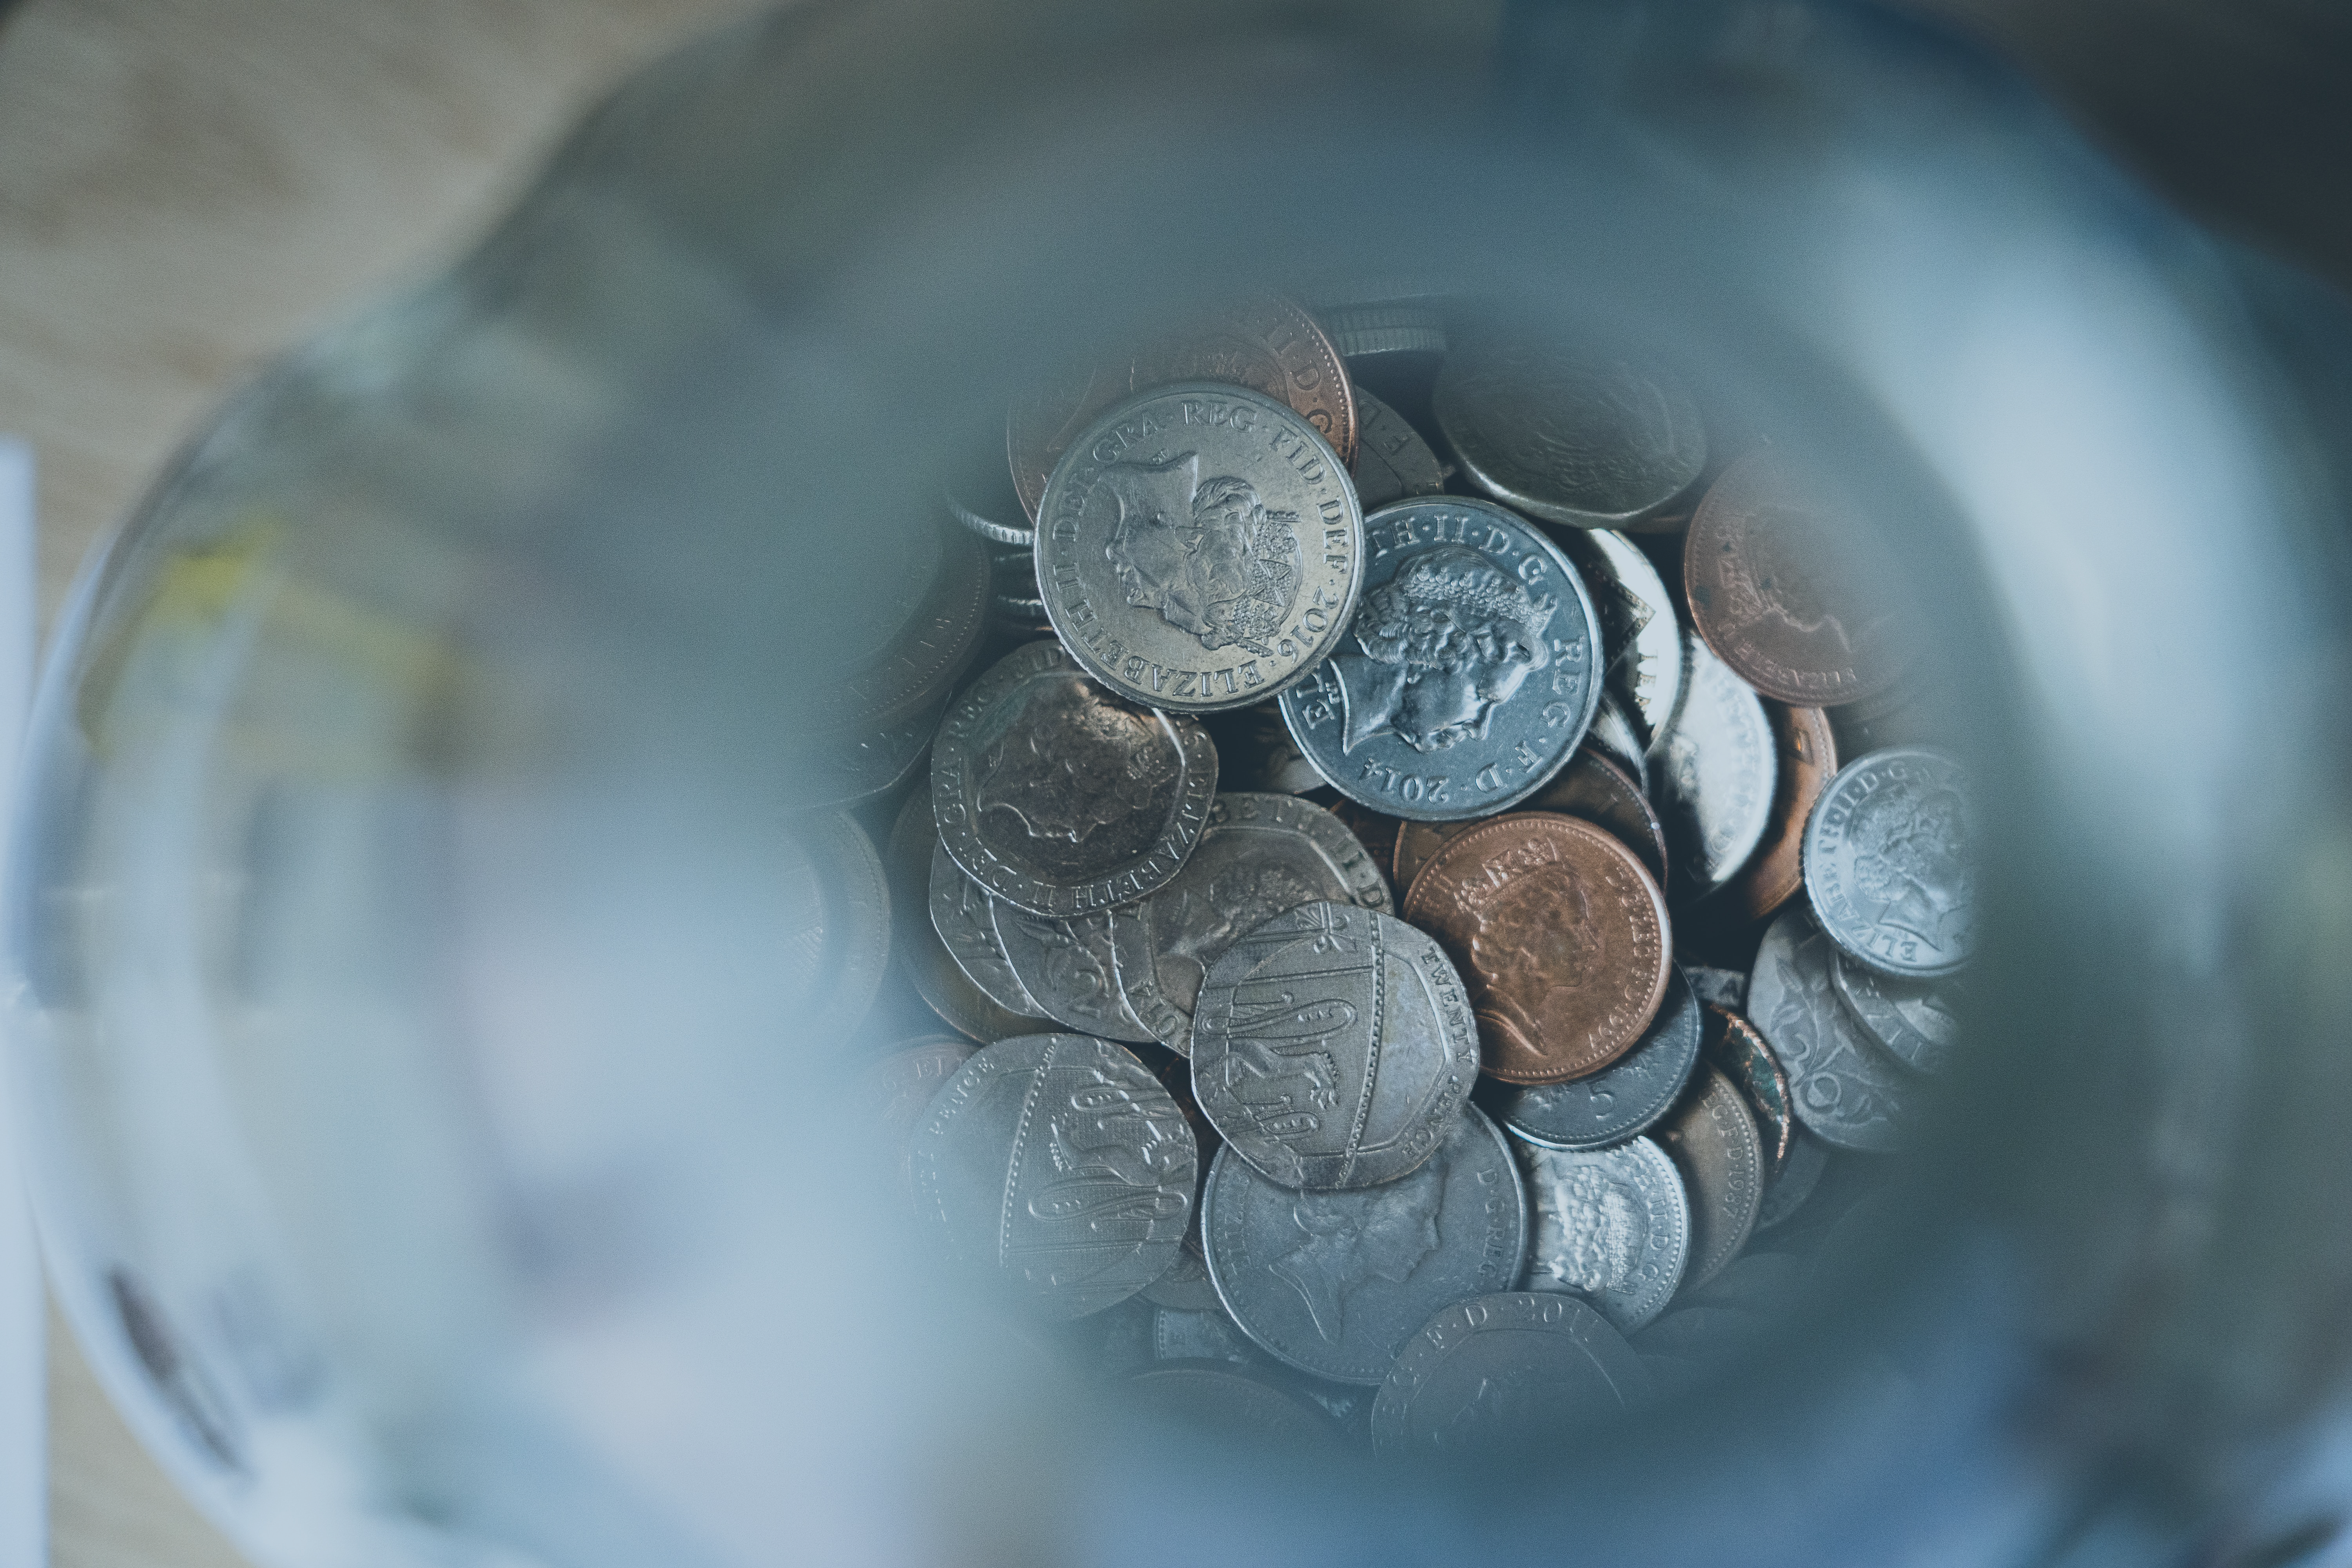 A pile of coins in focus at the bottom of an out of focus glass tube.